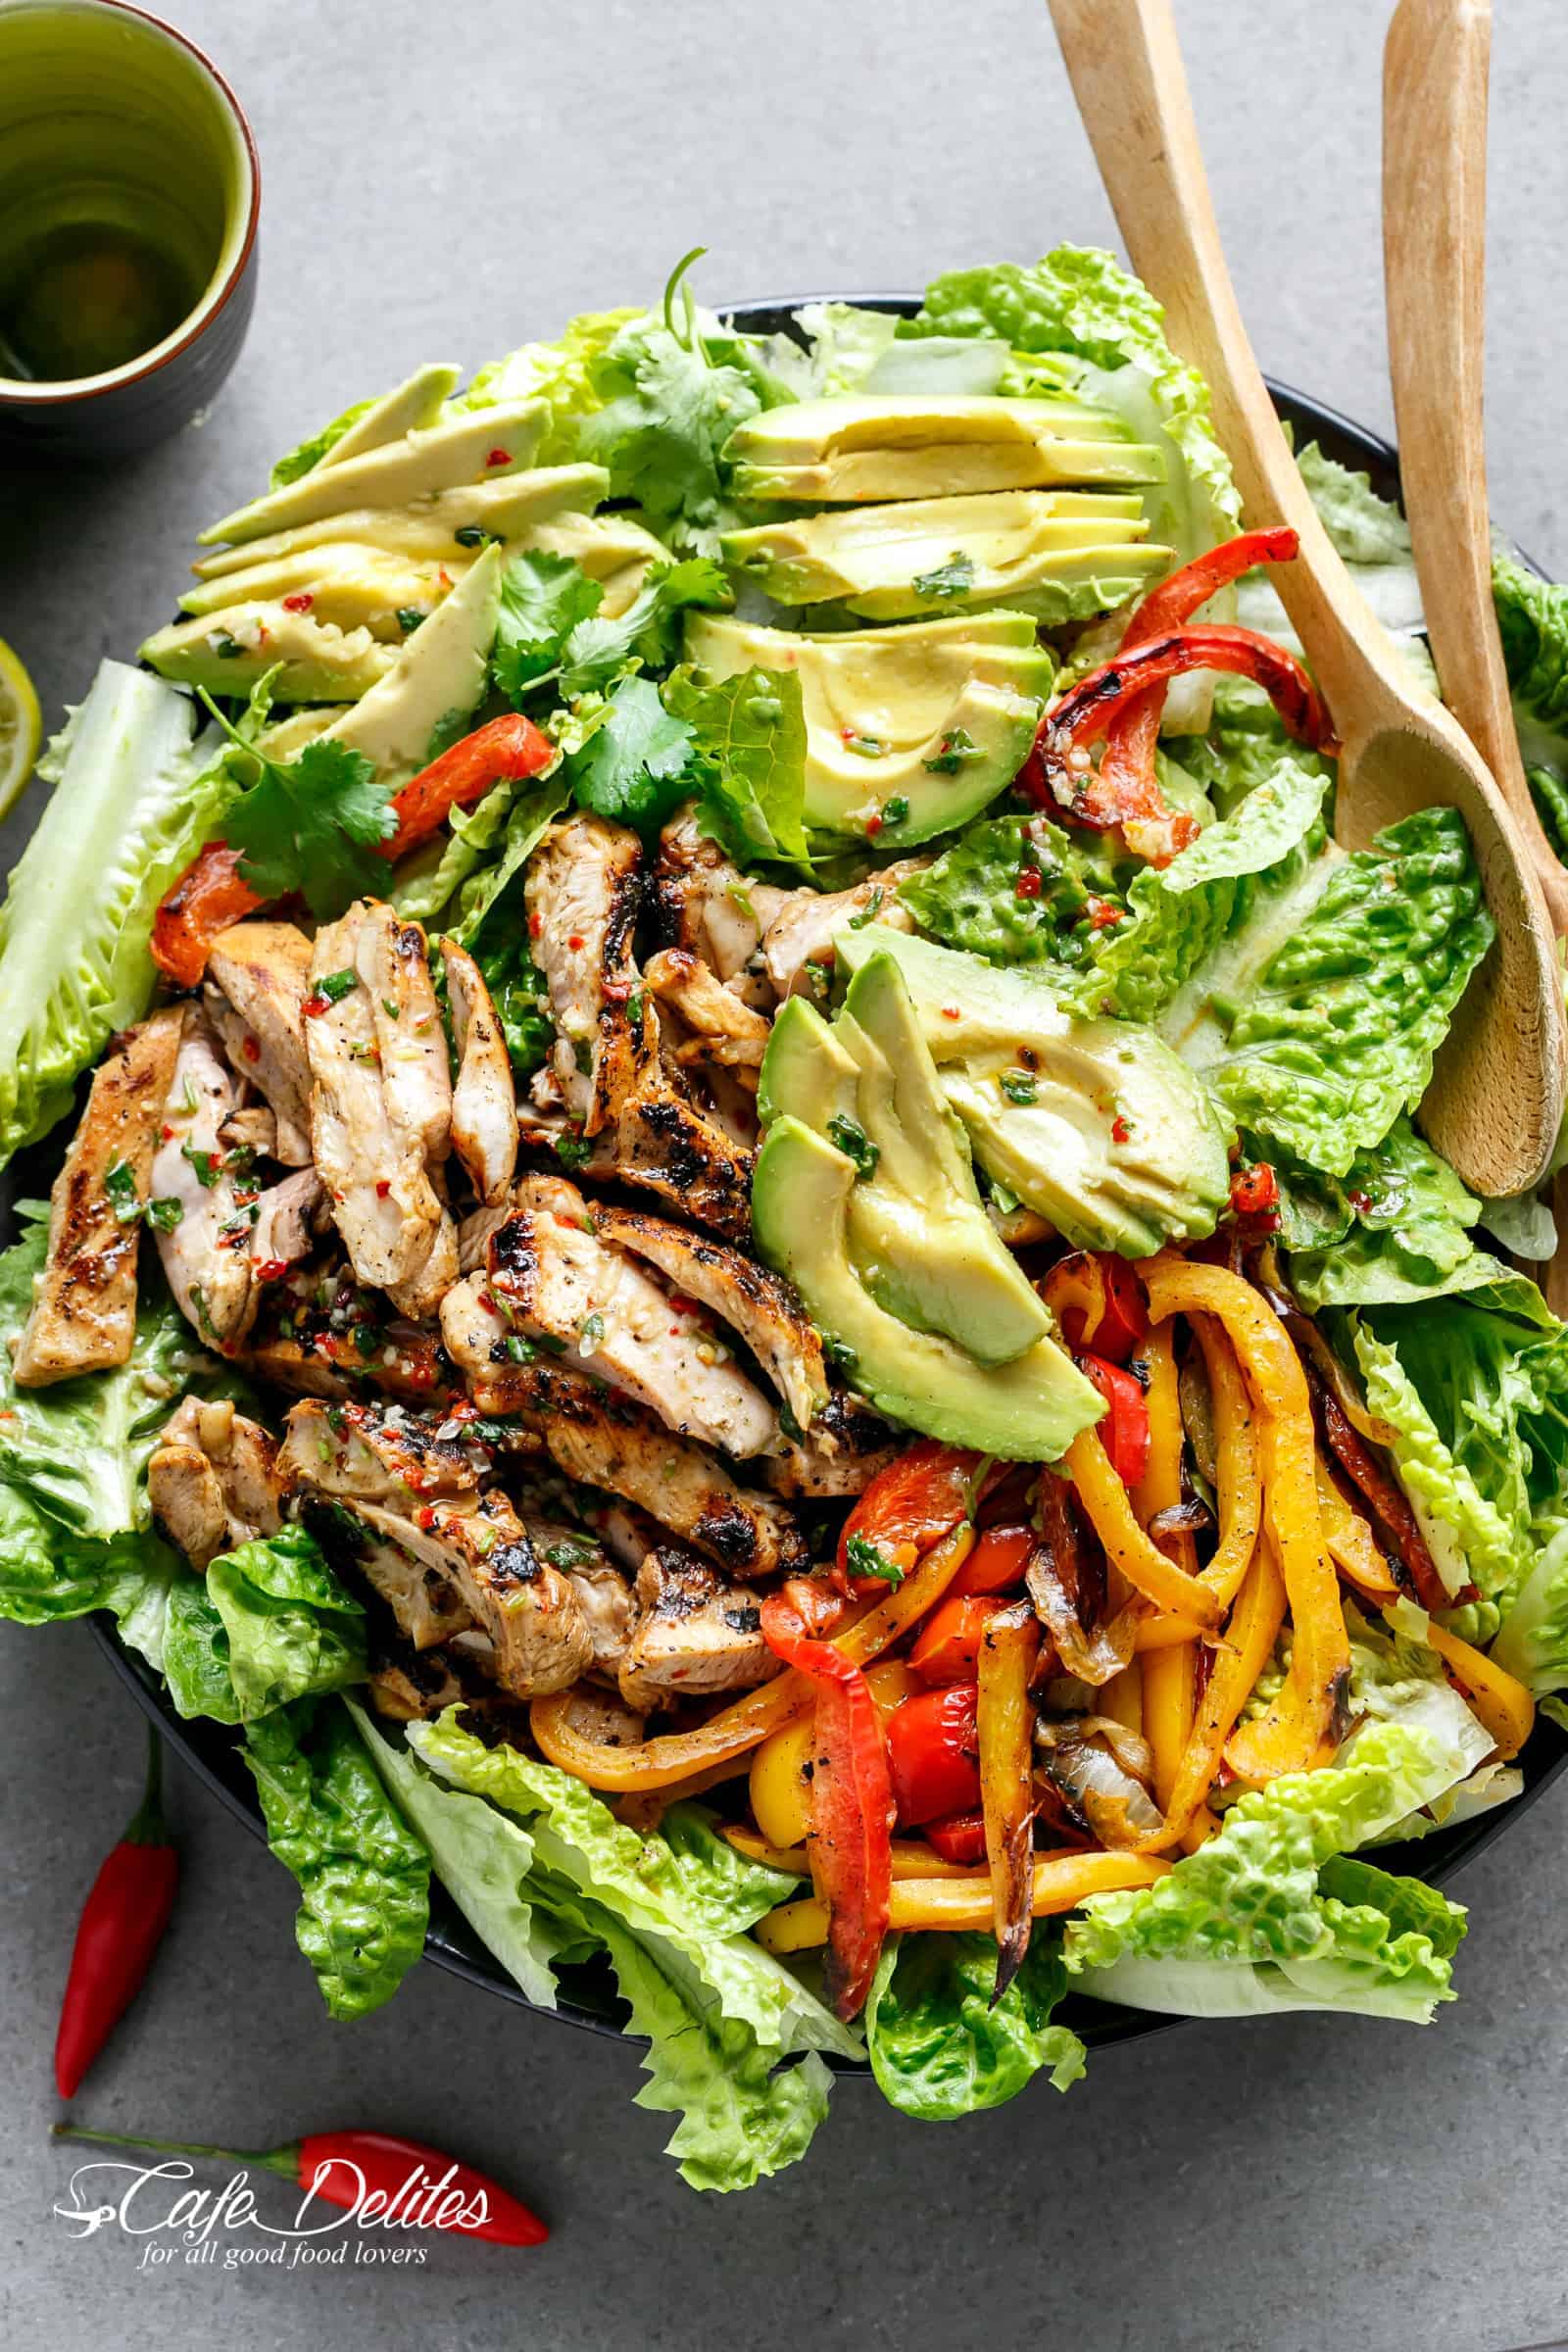 Grilled Chili Lime Chicken Fajita Salad from cafedelites.com on foodiecrush.com